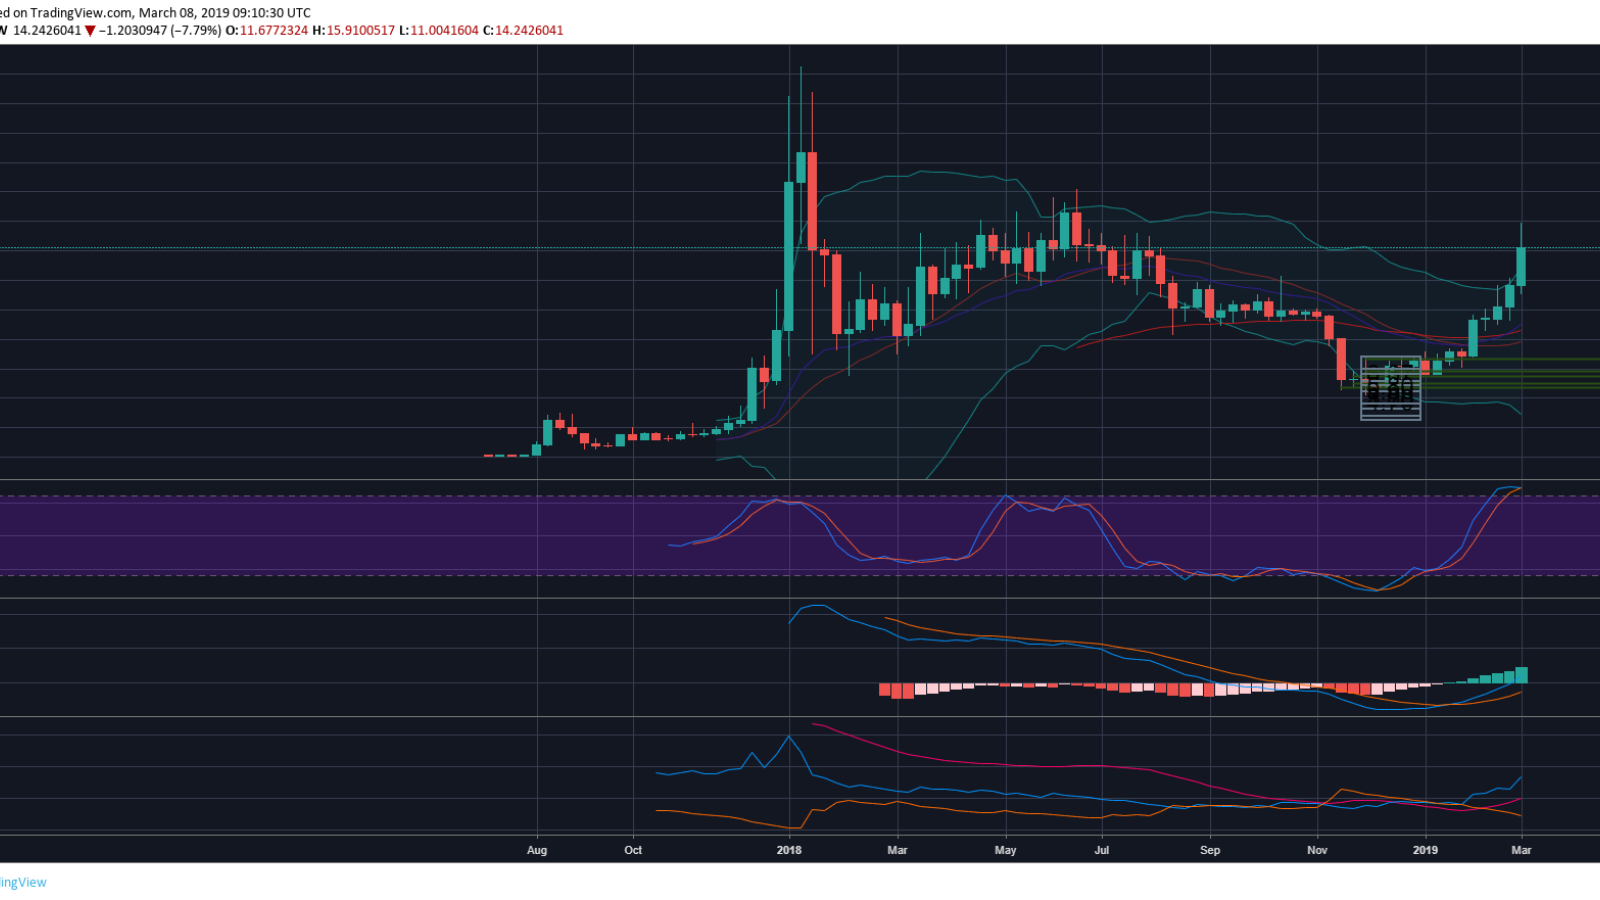 Binance Coin price prediction for March 2019 